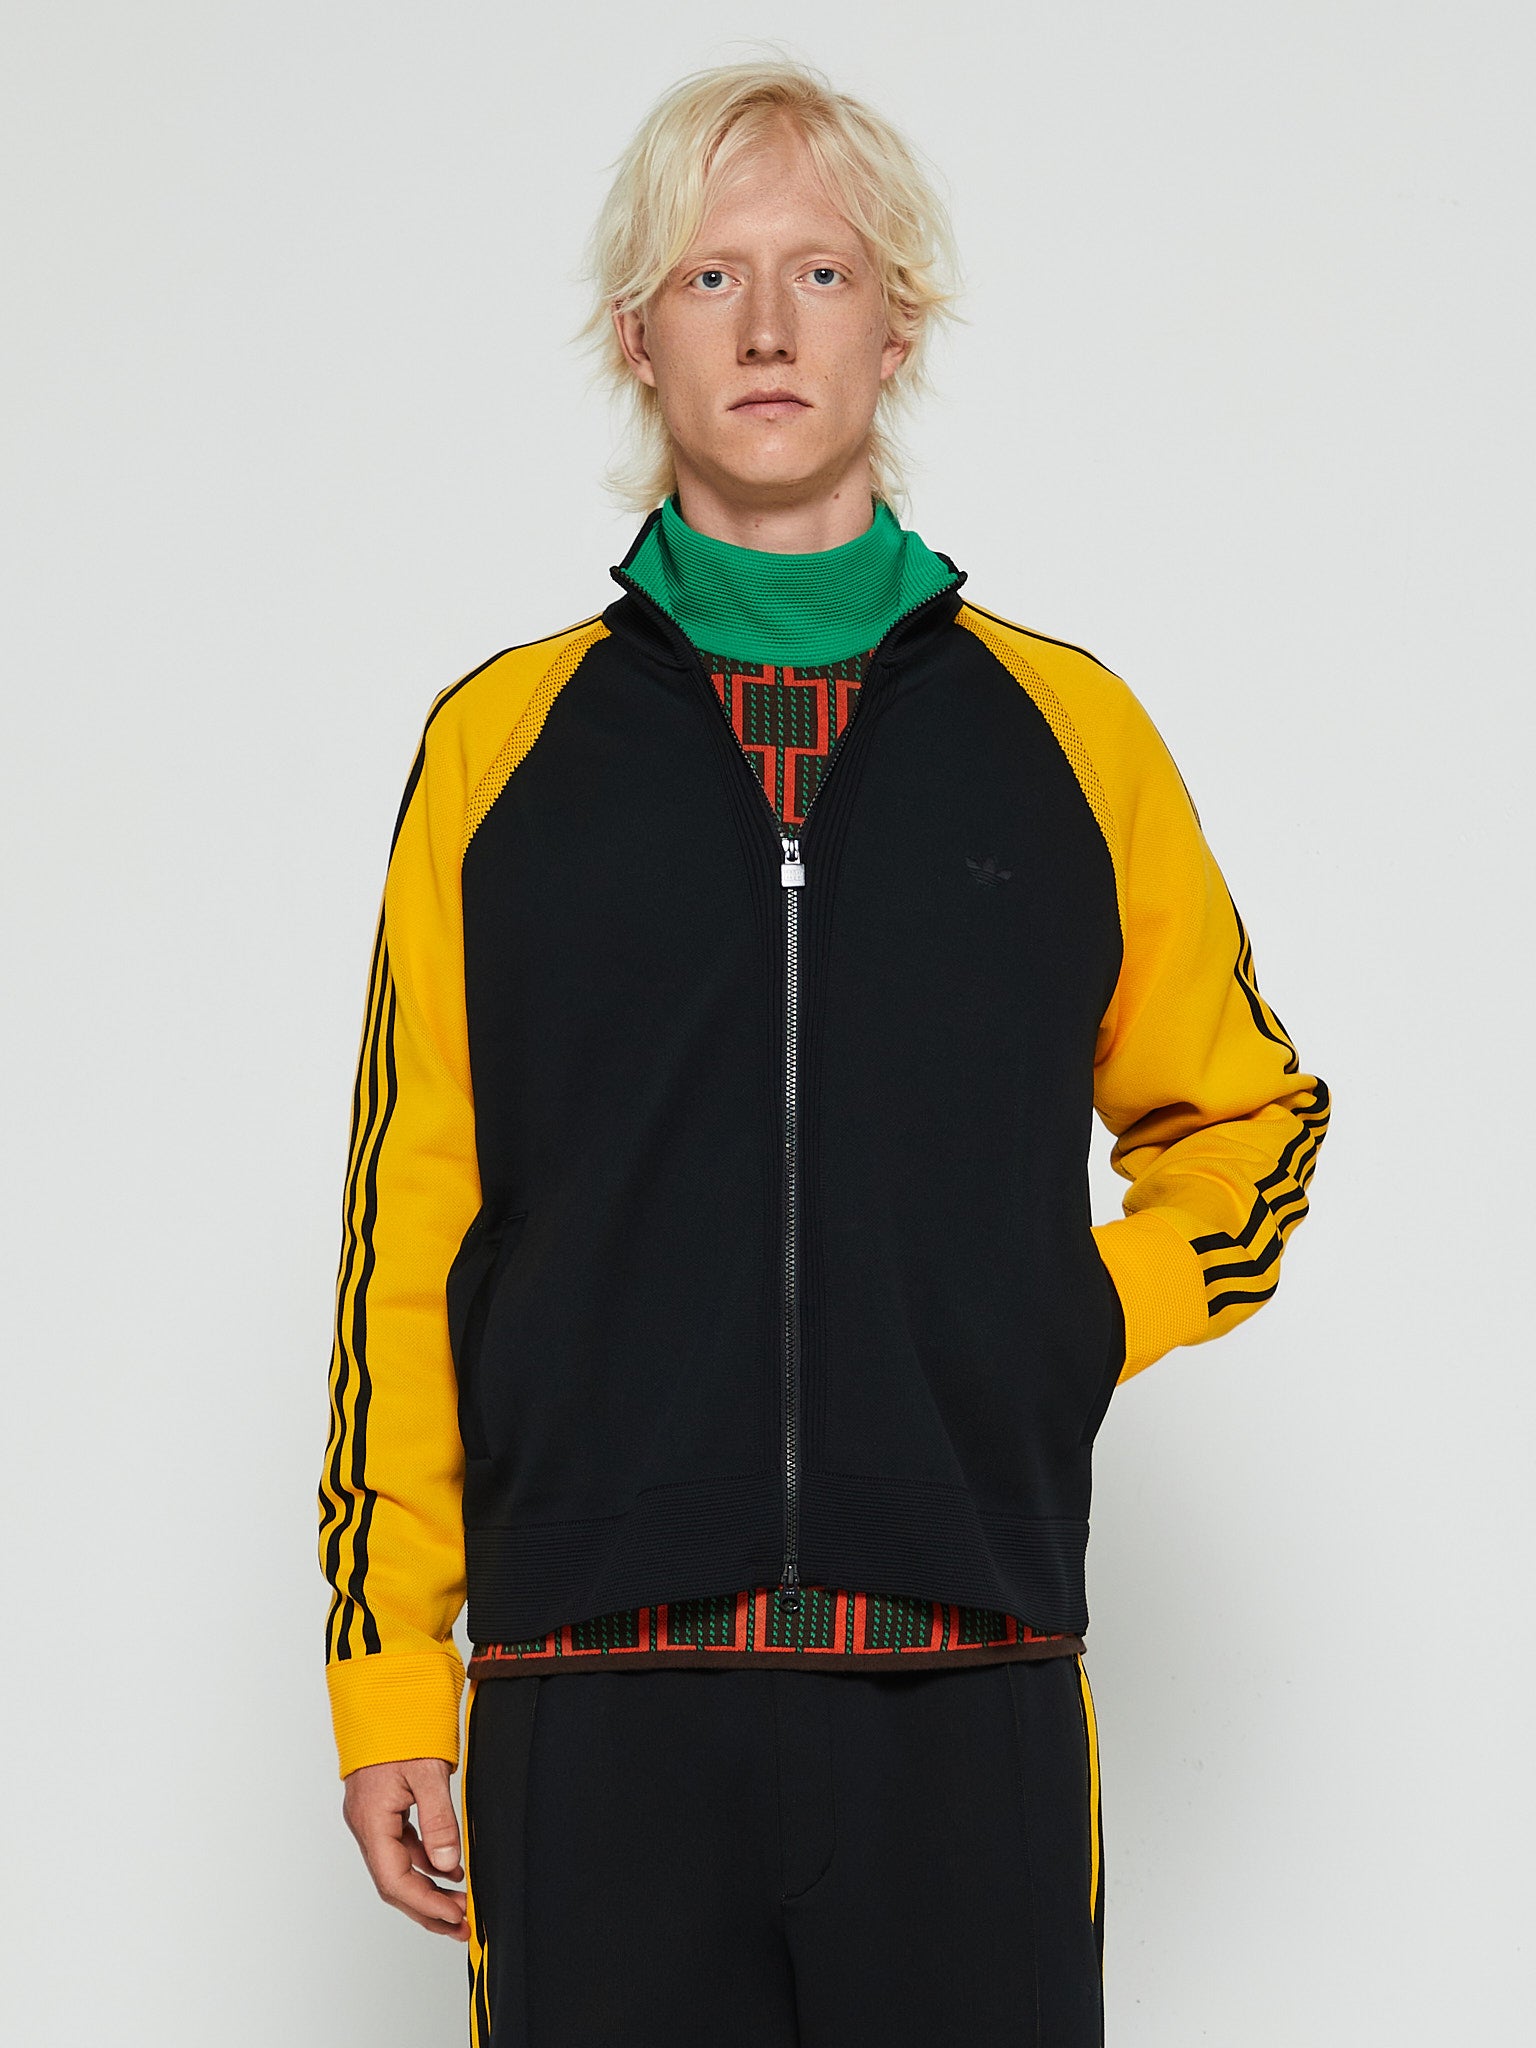 ADIDAS ORIGINALS BY WALES BONNER: jacket for man - Brown  Adidas Originals  By Wales Bonner jacket IB3263 online at